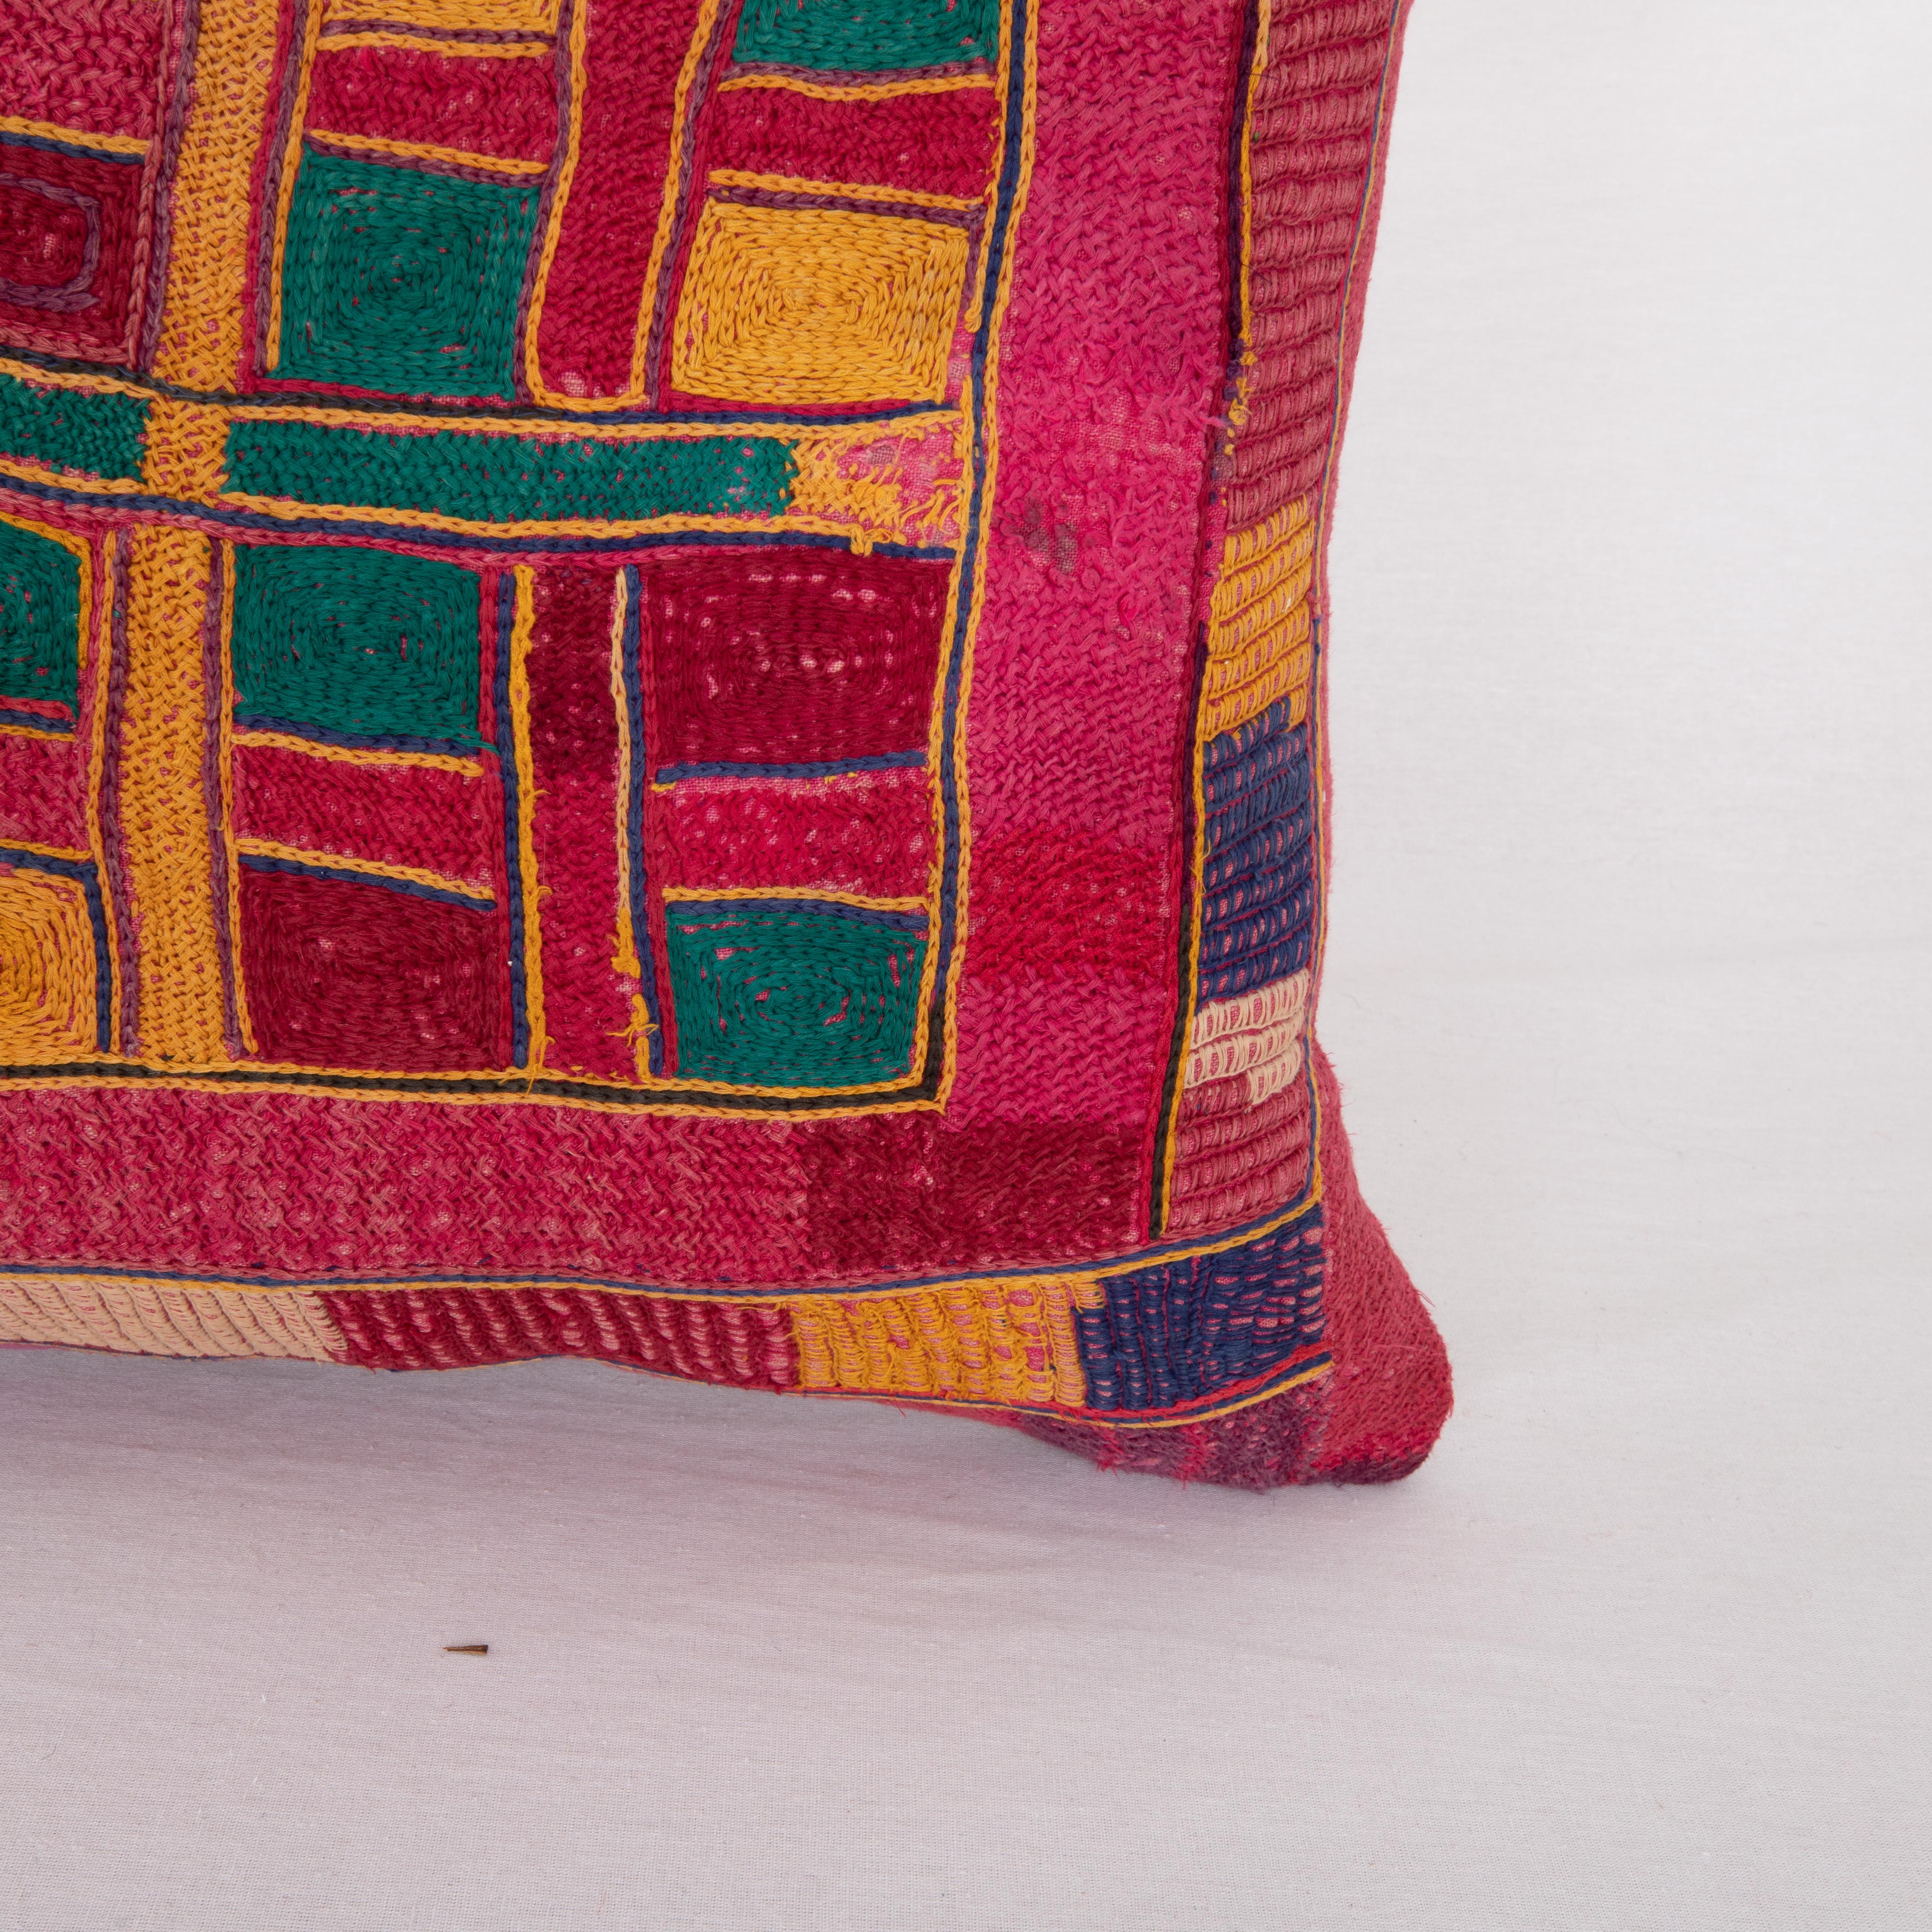 Embroidered Pillow Cover Made from an Indian Banjara Embroidery, mid 20th C. For Sale